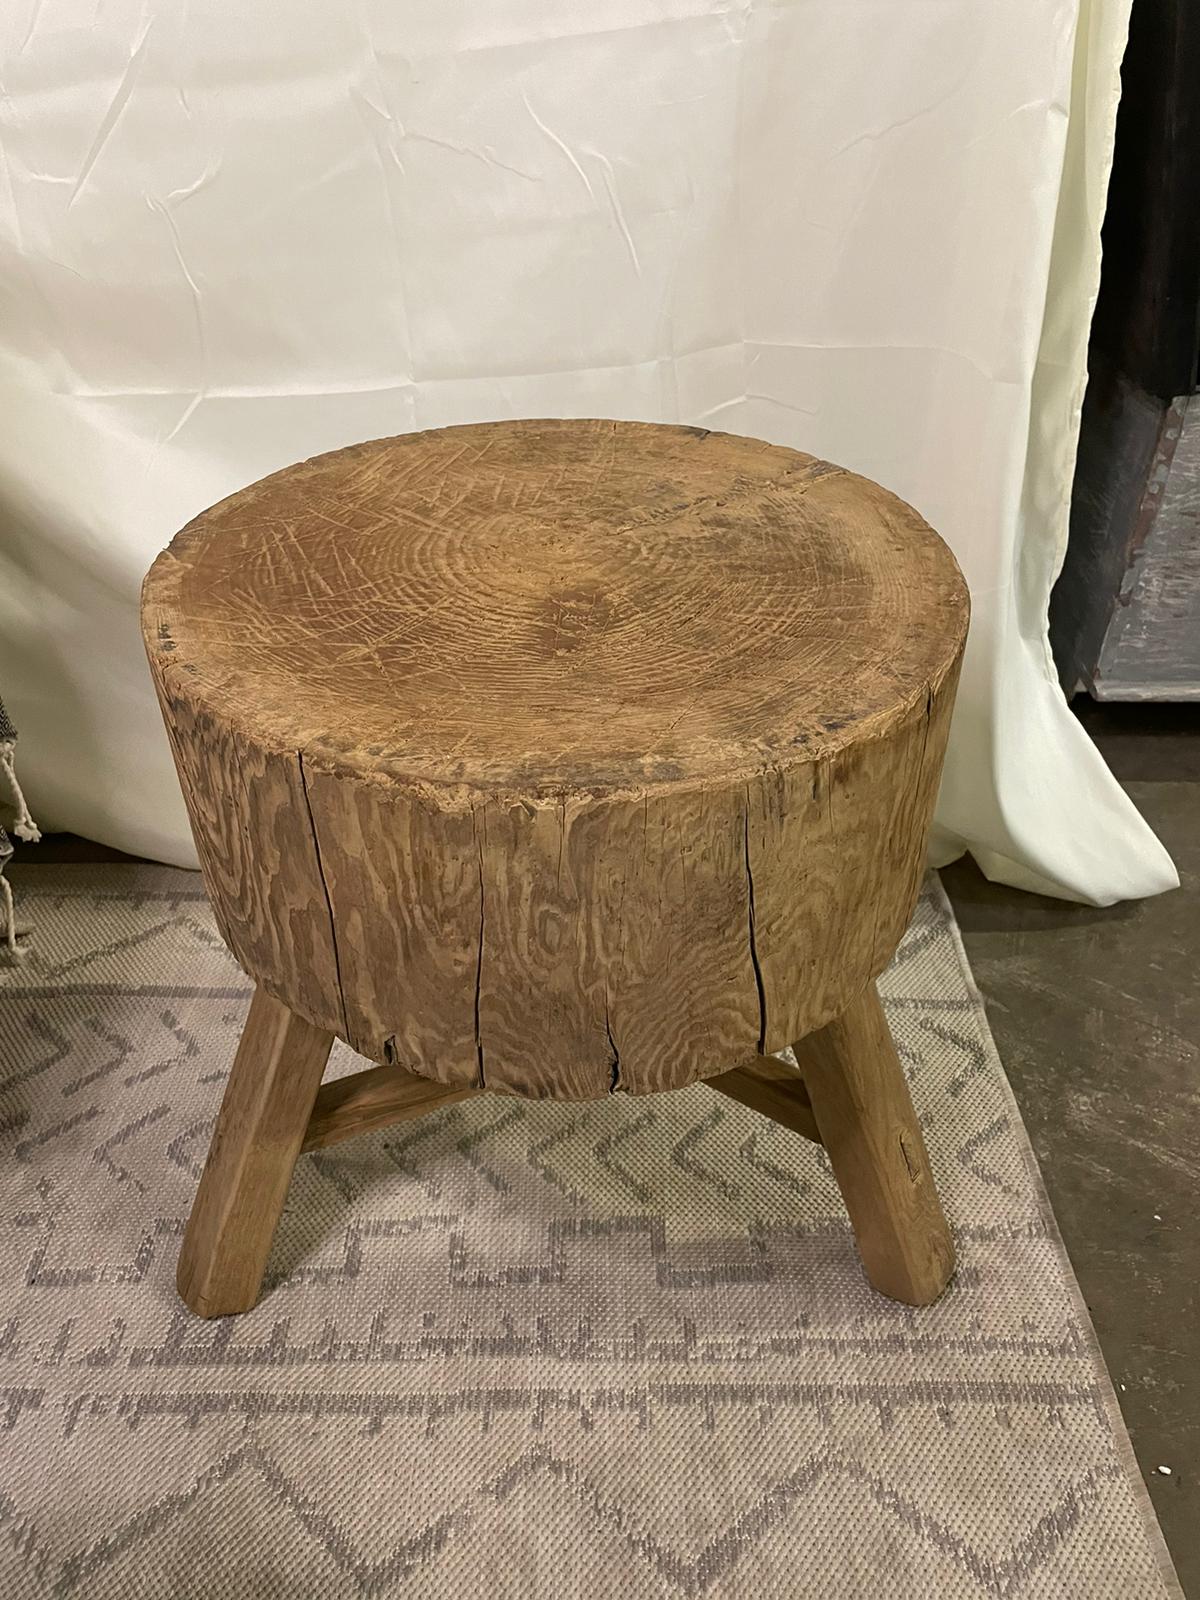 Antique Rustic Vintage Wooden Stool / side table / tree shape